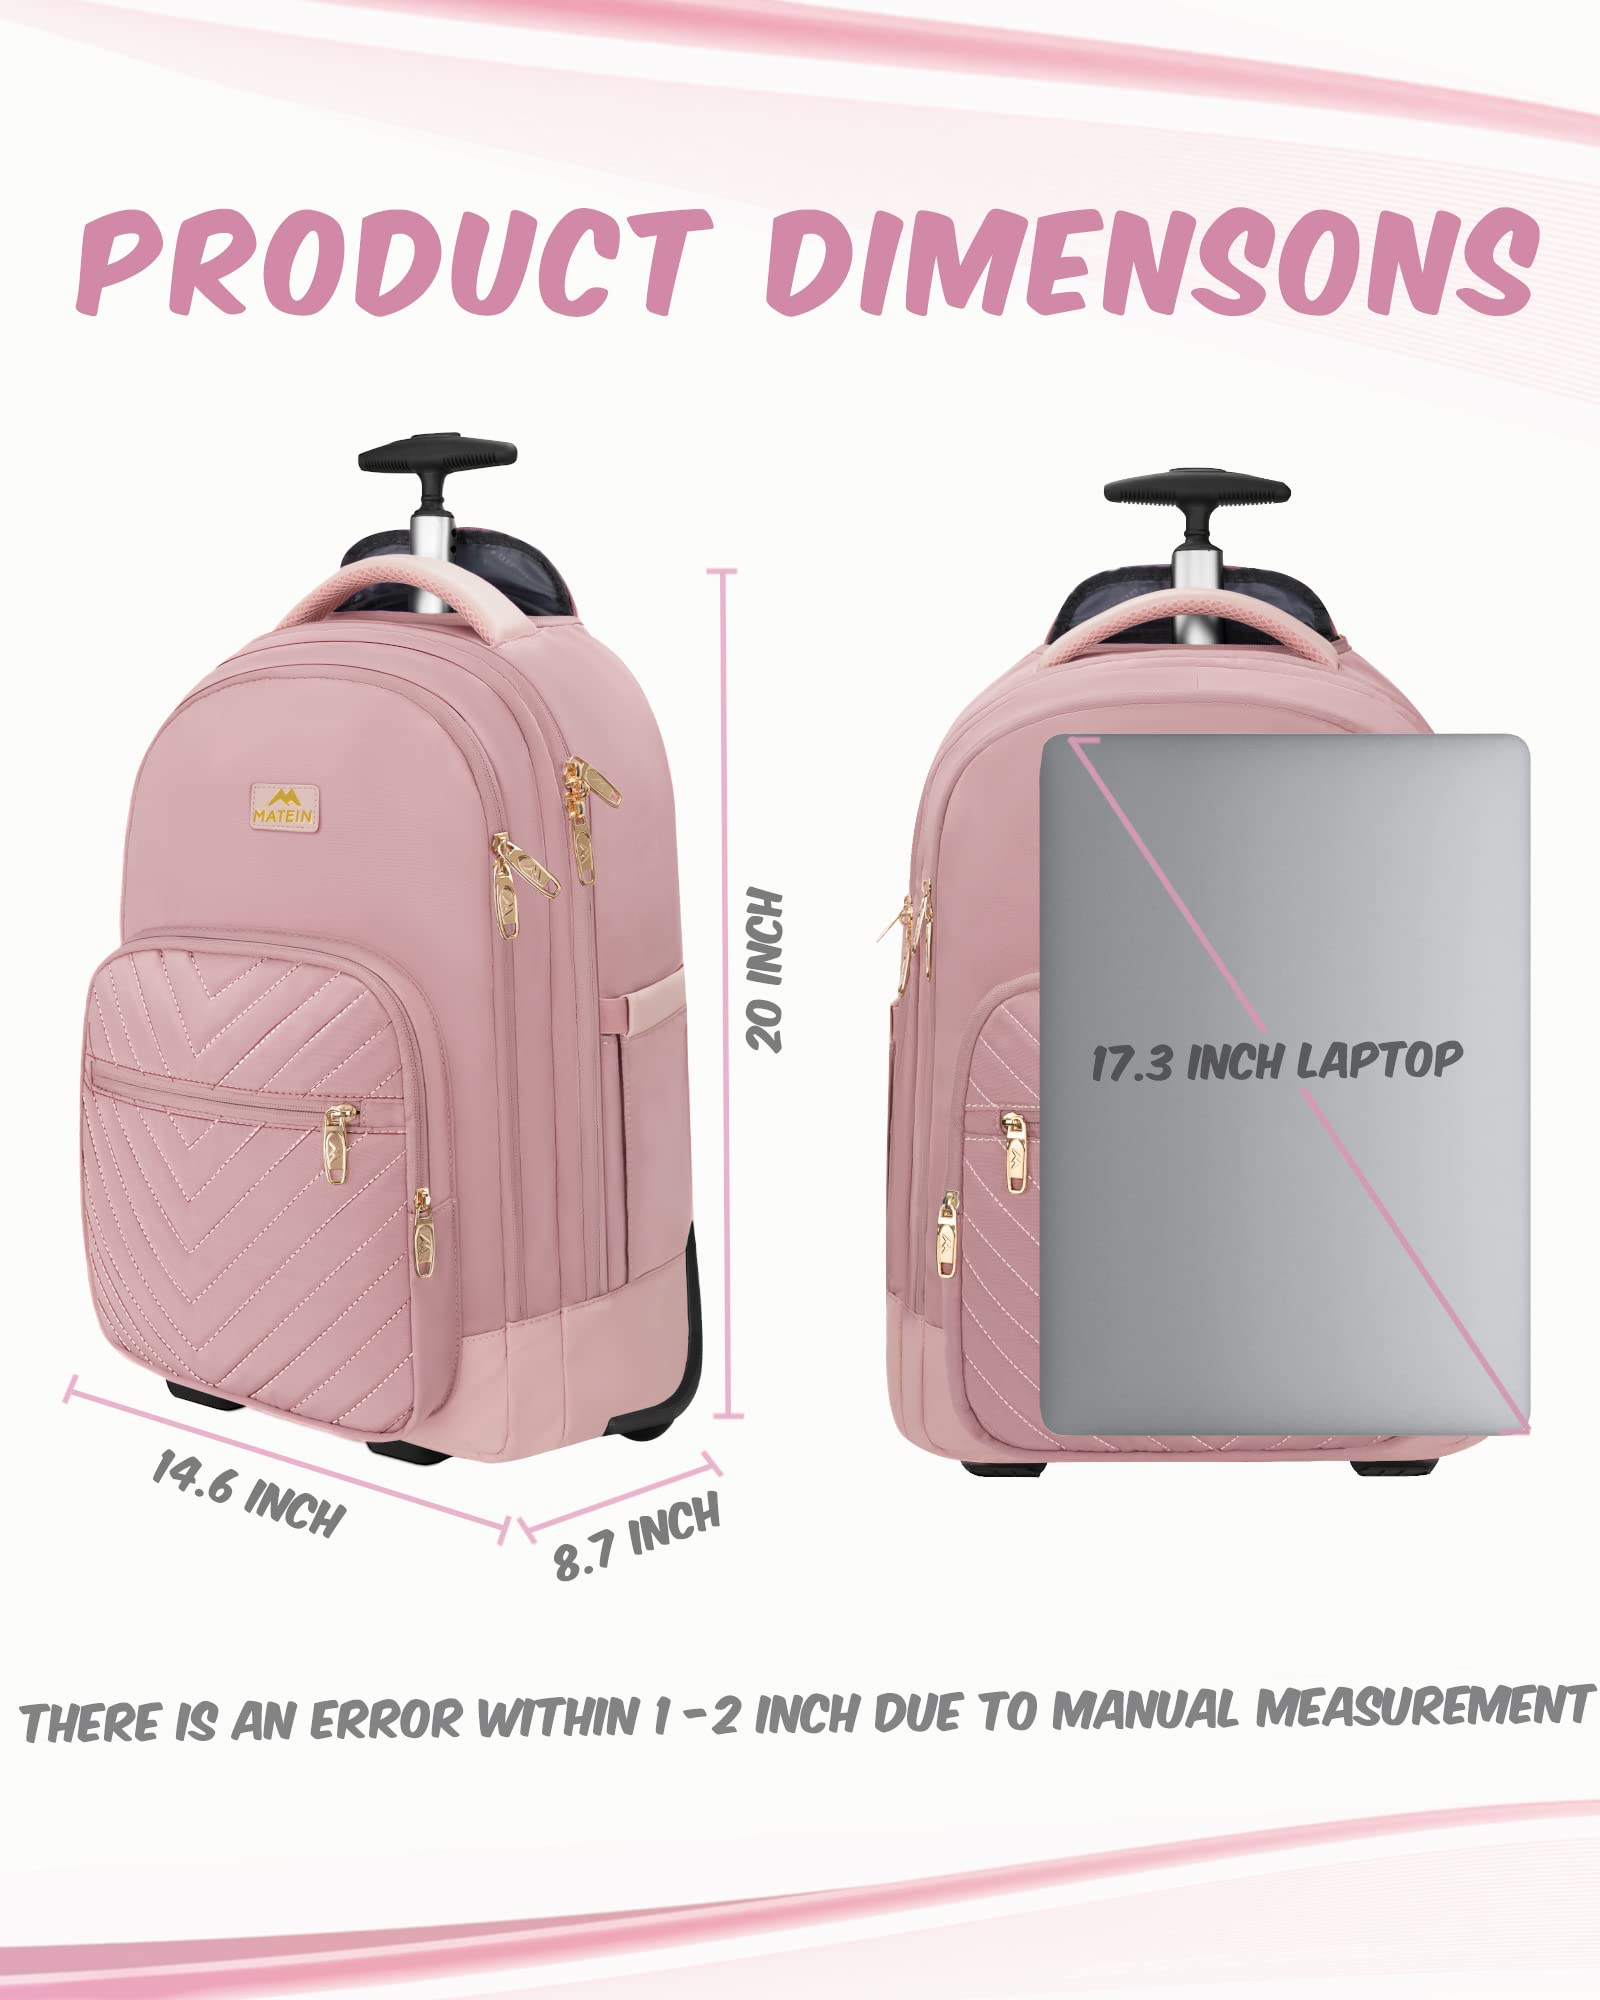 MATEIN Rolling Backpack for Women, 17 Inch Travel Laptop Backpacks with Wheels, Waterproof Large Carry On Business Luggage Roller Backpack, Trolley Suitcase Overnight College Work Computer Bag,Pink